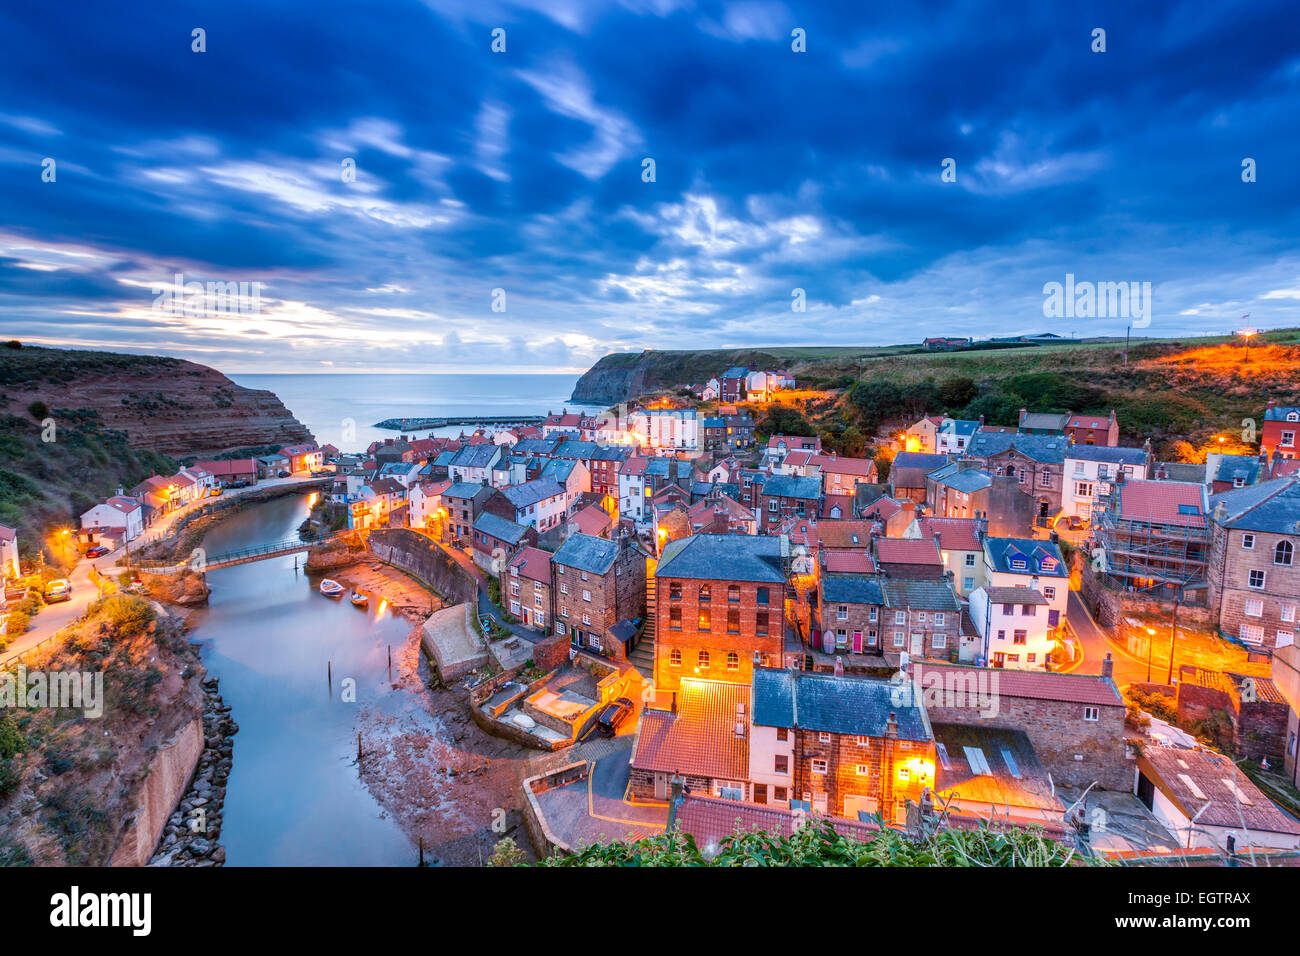 A view over the traditional fishing village of Staithes, North Yorkshire, England, United Kingdom, Europe. Stock Photo